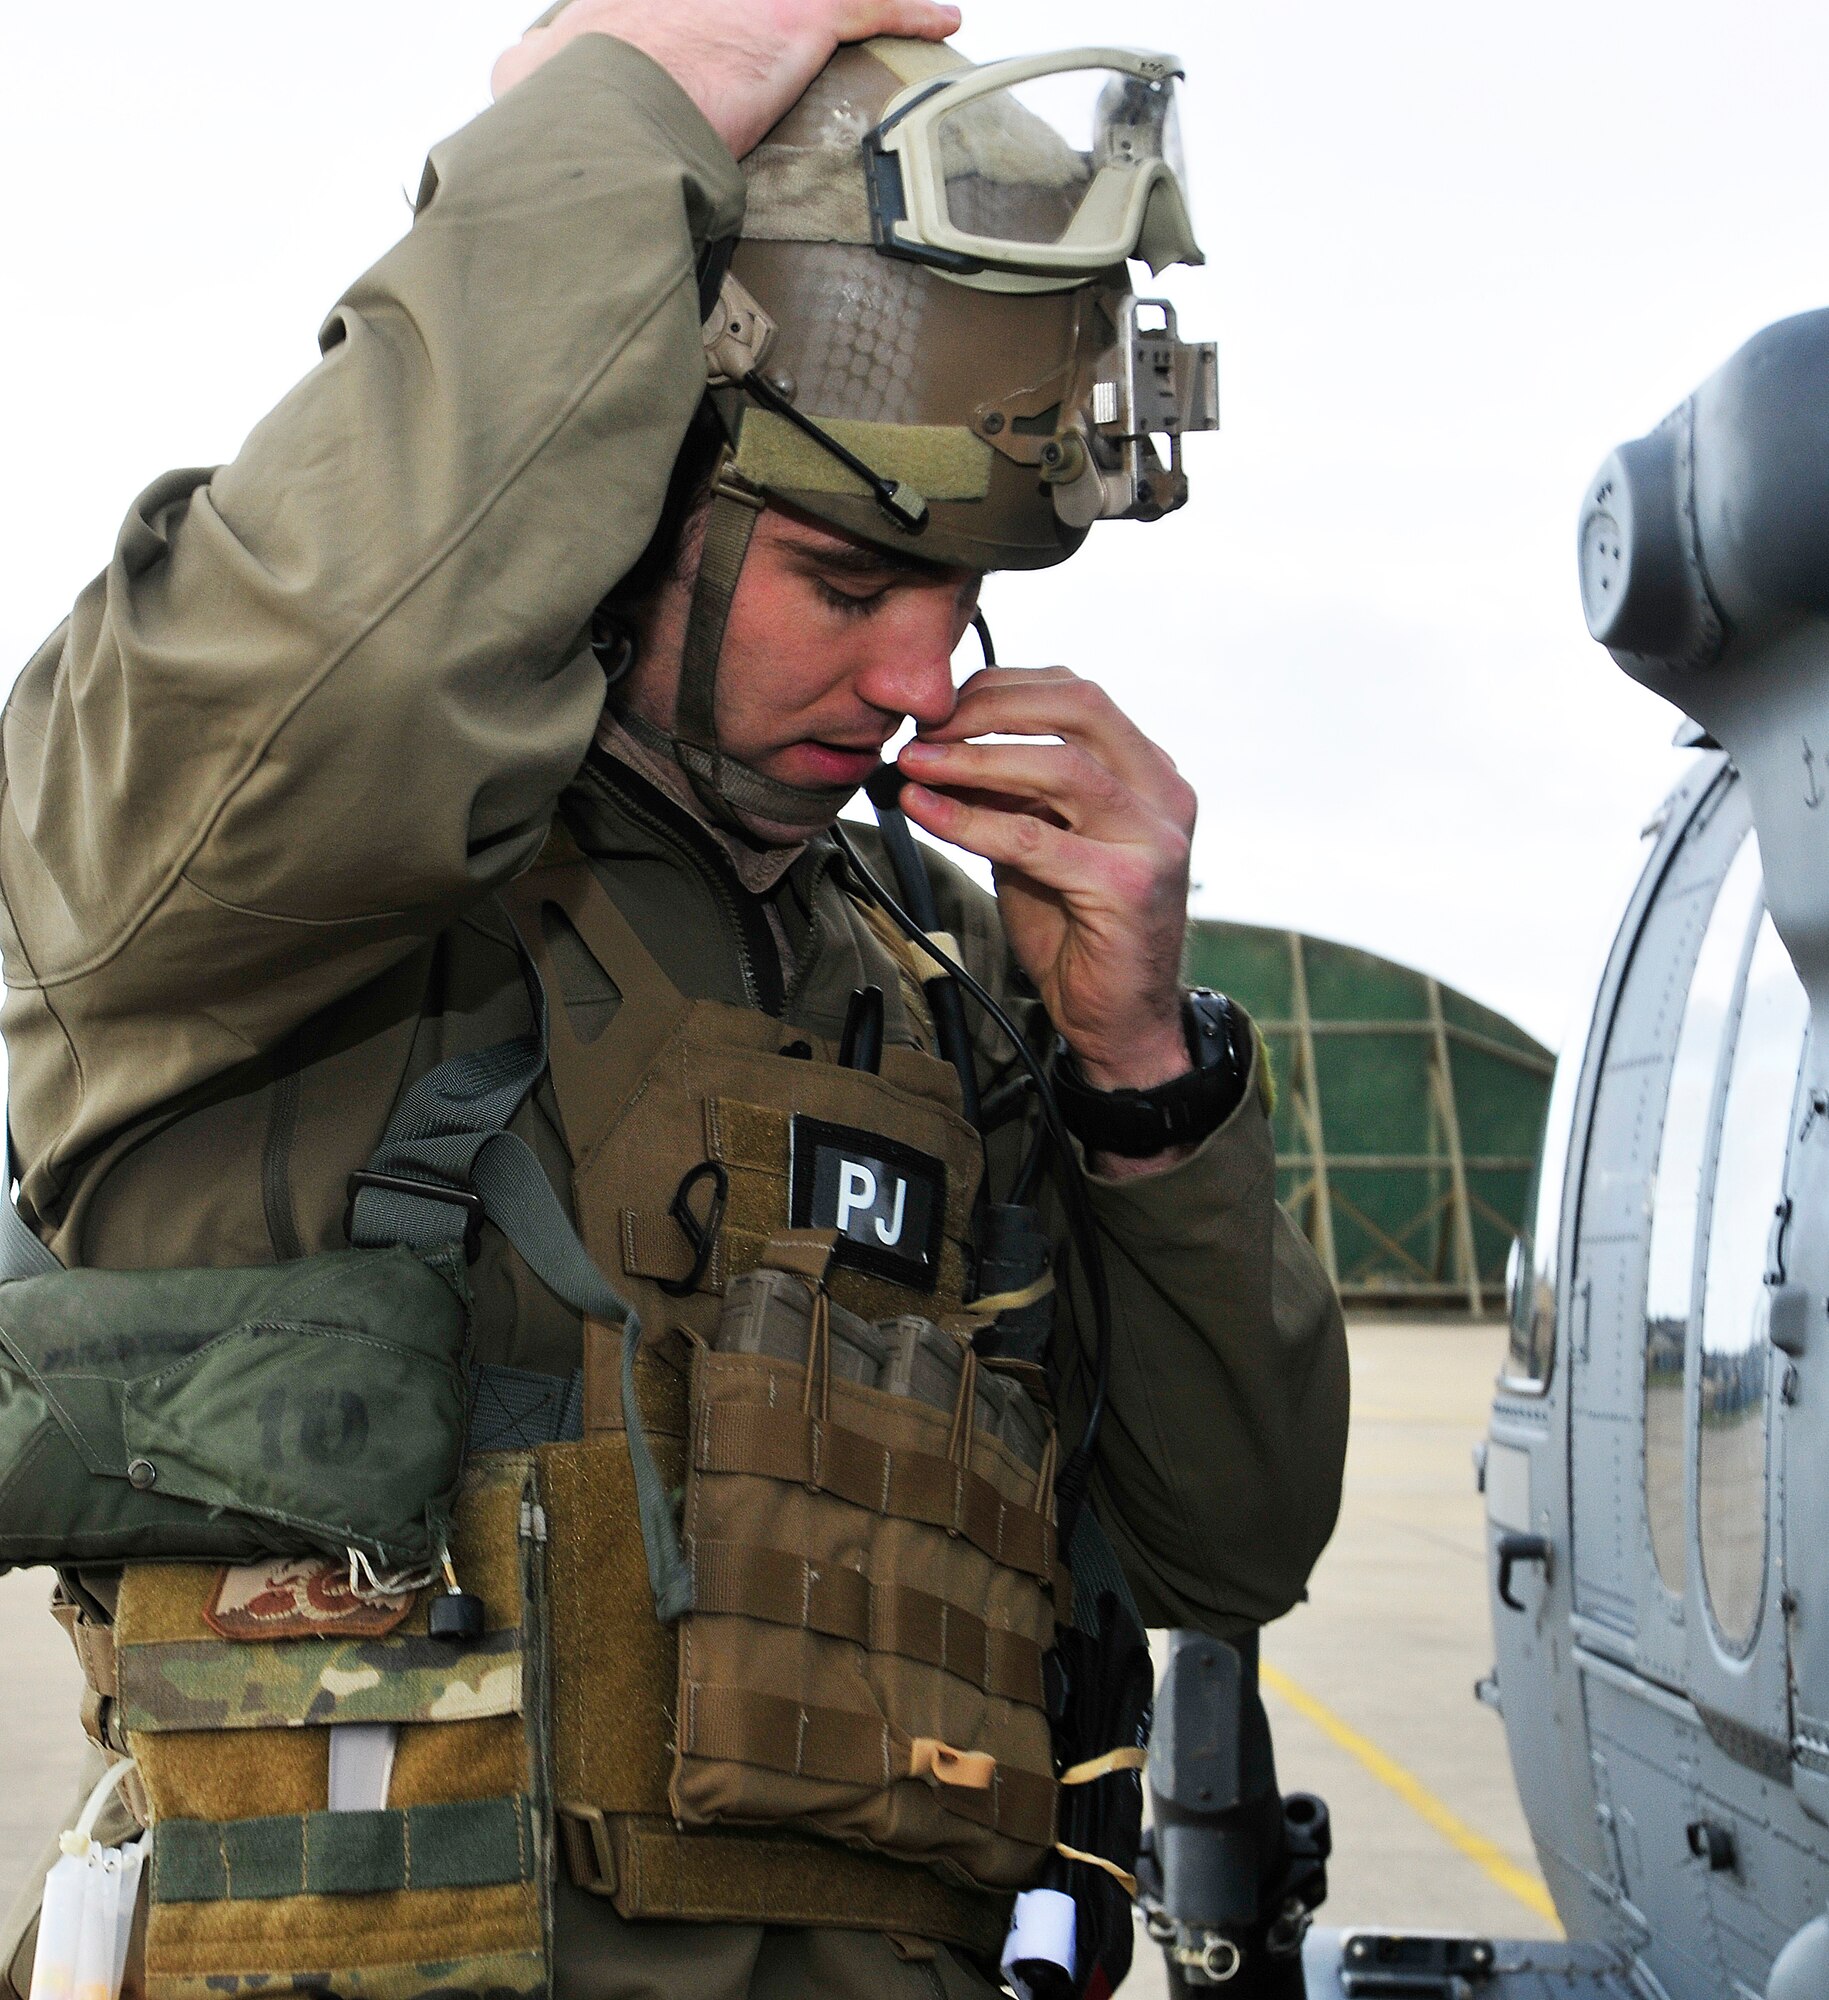 ROYAL AIR FORCE LAKENHEATH, England - Senior Airman Cody Cerny, 56th Rescue Squadron pararescueman, adjusts his microphone on the flightline prior to taking off in an HH-60G Pave Hawk Jan. 5, 2012. While on alert with the 212th Rescue Squadron in Alaska, Cerny responded to an urgent medical evacuation request and saved the life of a utility worker on Dec. 16, 2011. The worker had fallen down a steep slope and sustained injuries to his chest. (U.S. Air Force photo by Senior Airman Tiffany M. Deuel)